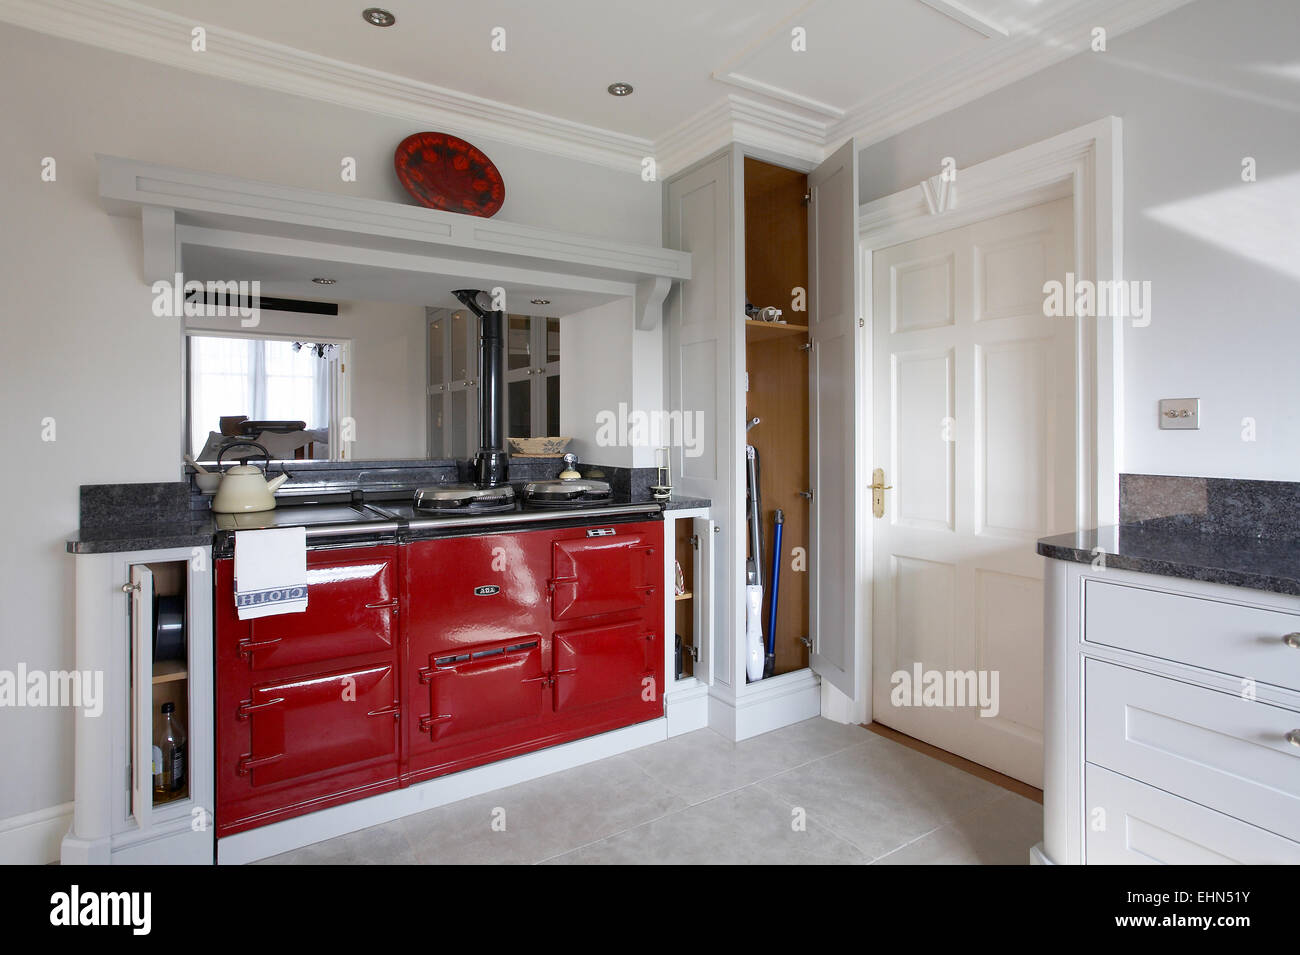 a-red-aga-cooker-in-a-modern-kitchen-in-a-home-in-the-uk-EHN51Y.jpg